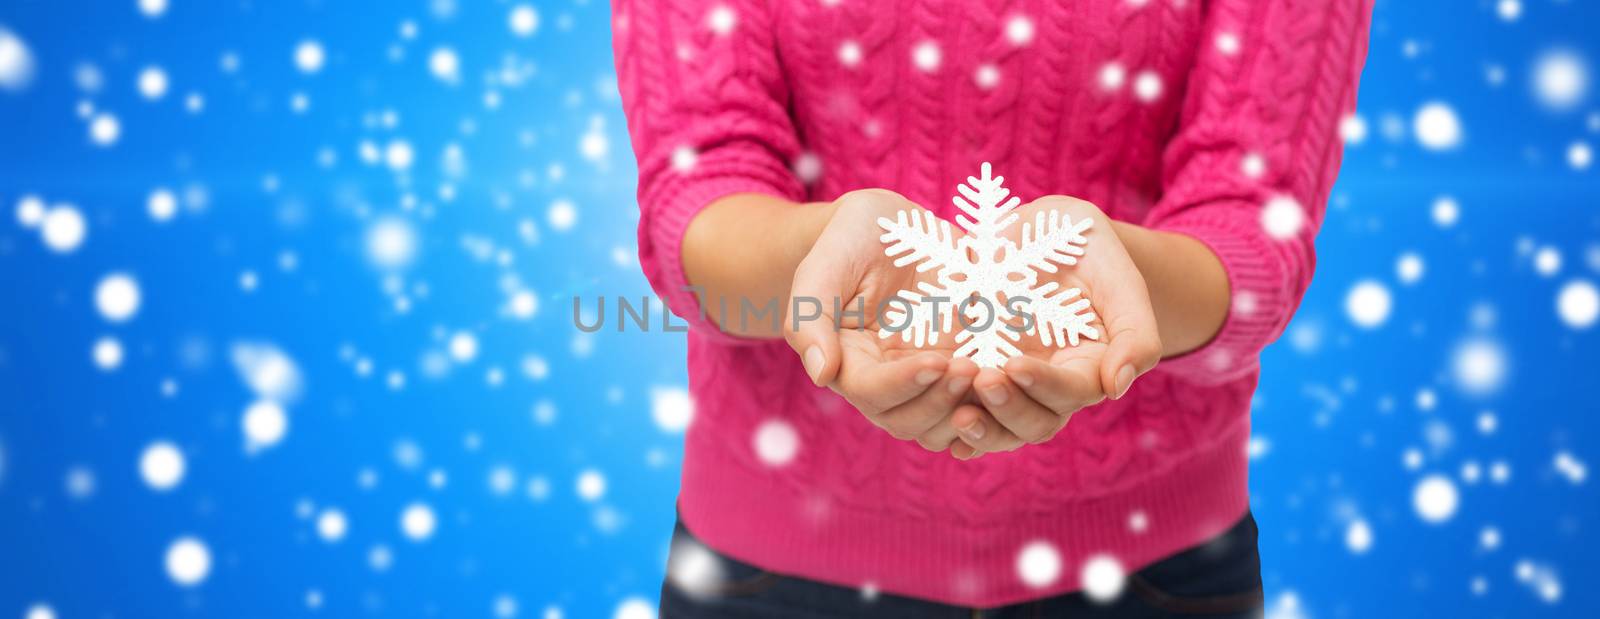 christmas, winter, holidays and people concept - close up of woman in pink sweater holding snowflake decoration over blue snowy background